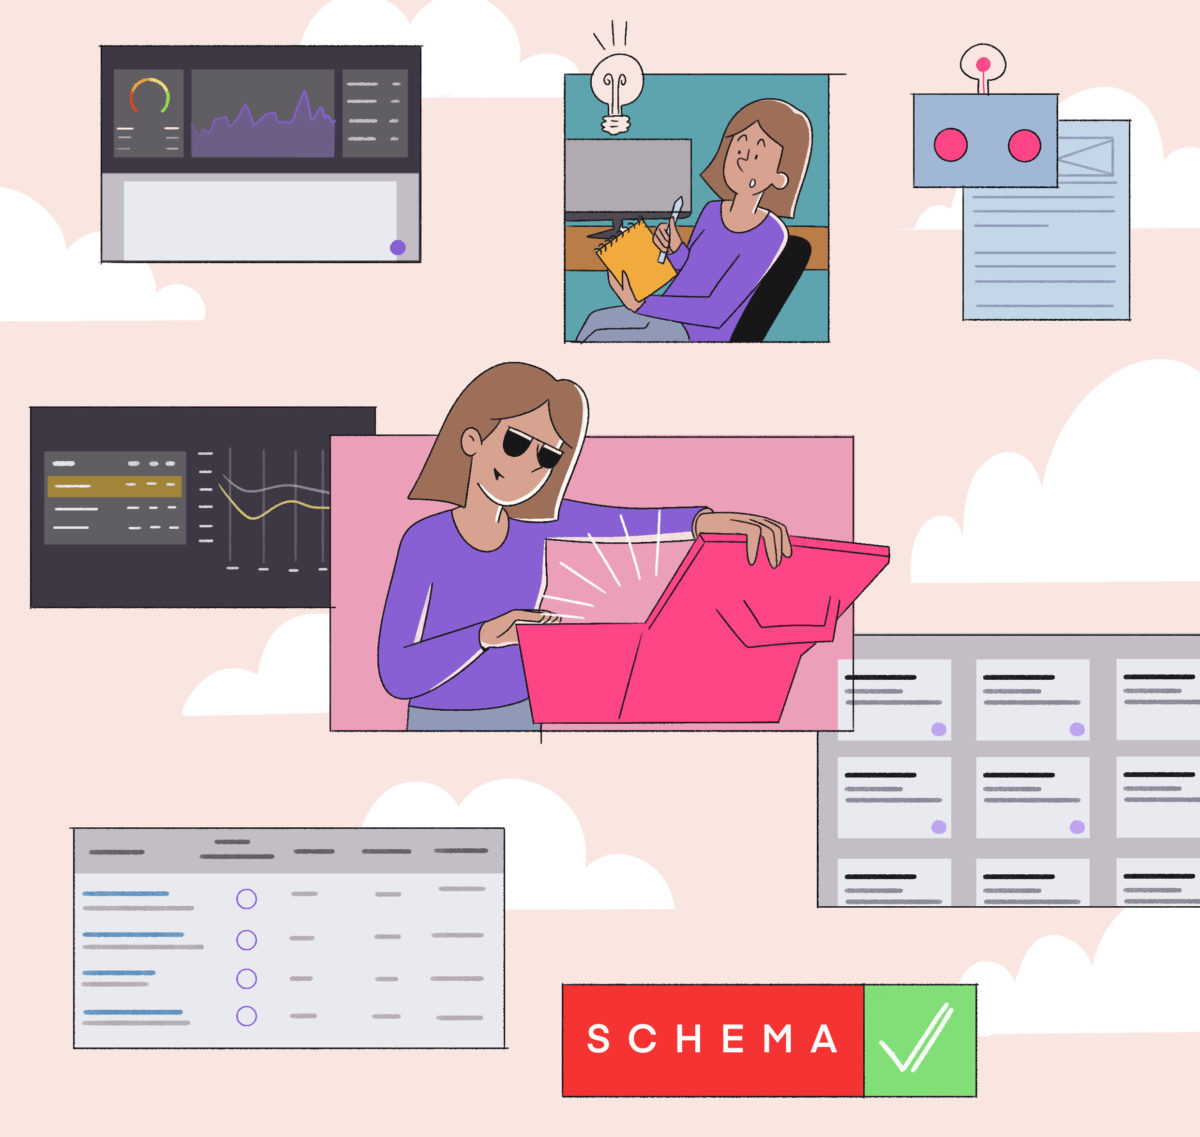 A person surrounded by various graphical interfaces representing data management and organizational tasks, with a focus on schema validation.